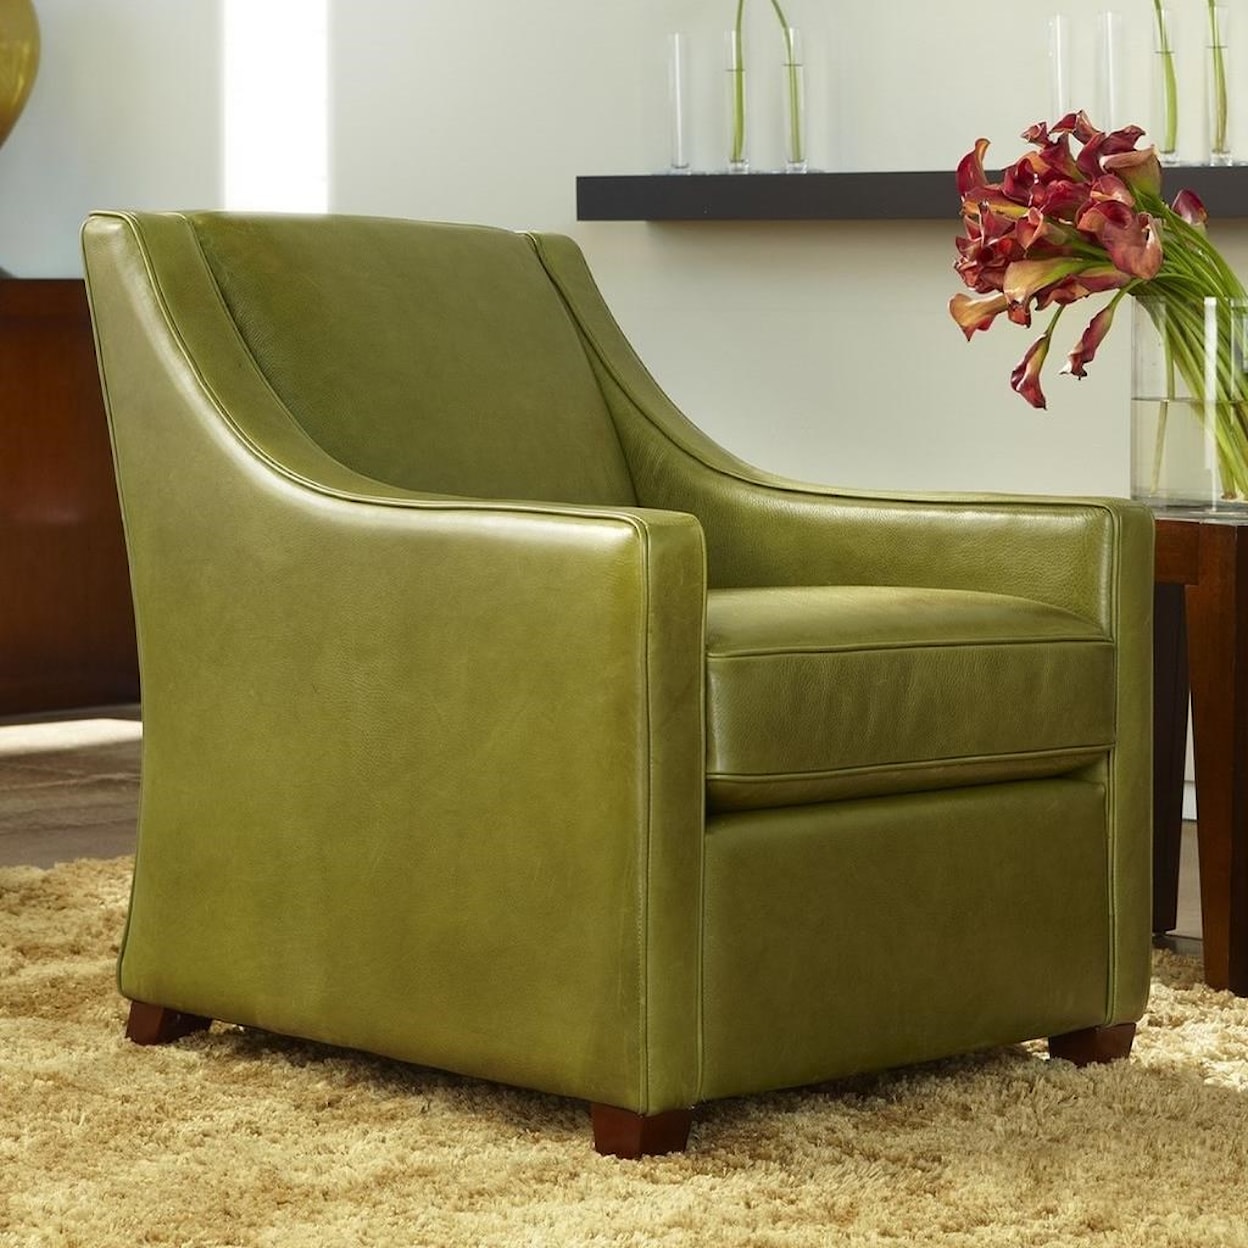 American Leather Bella Accent Chair